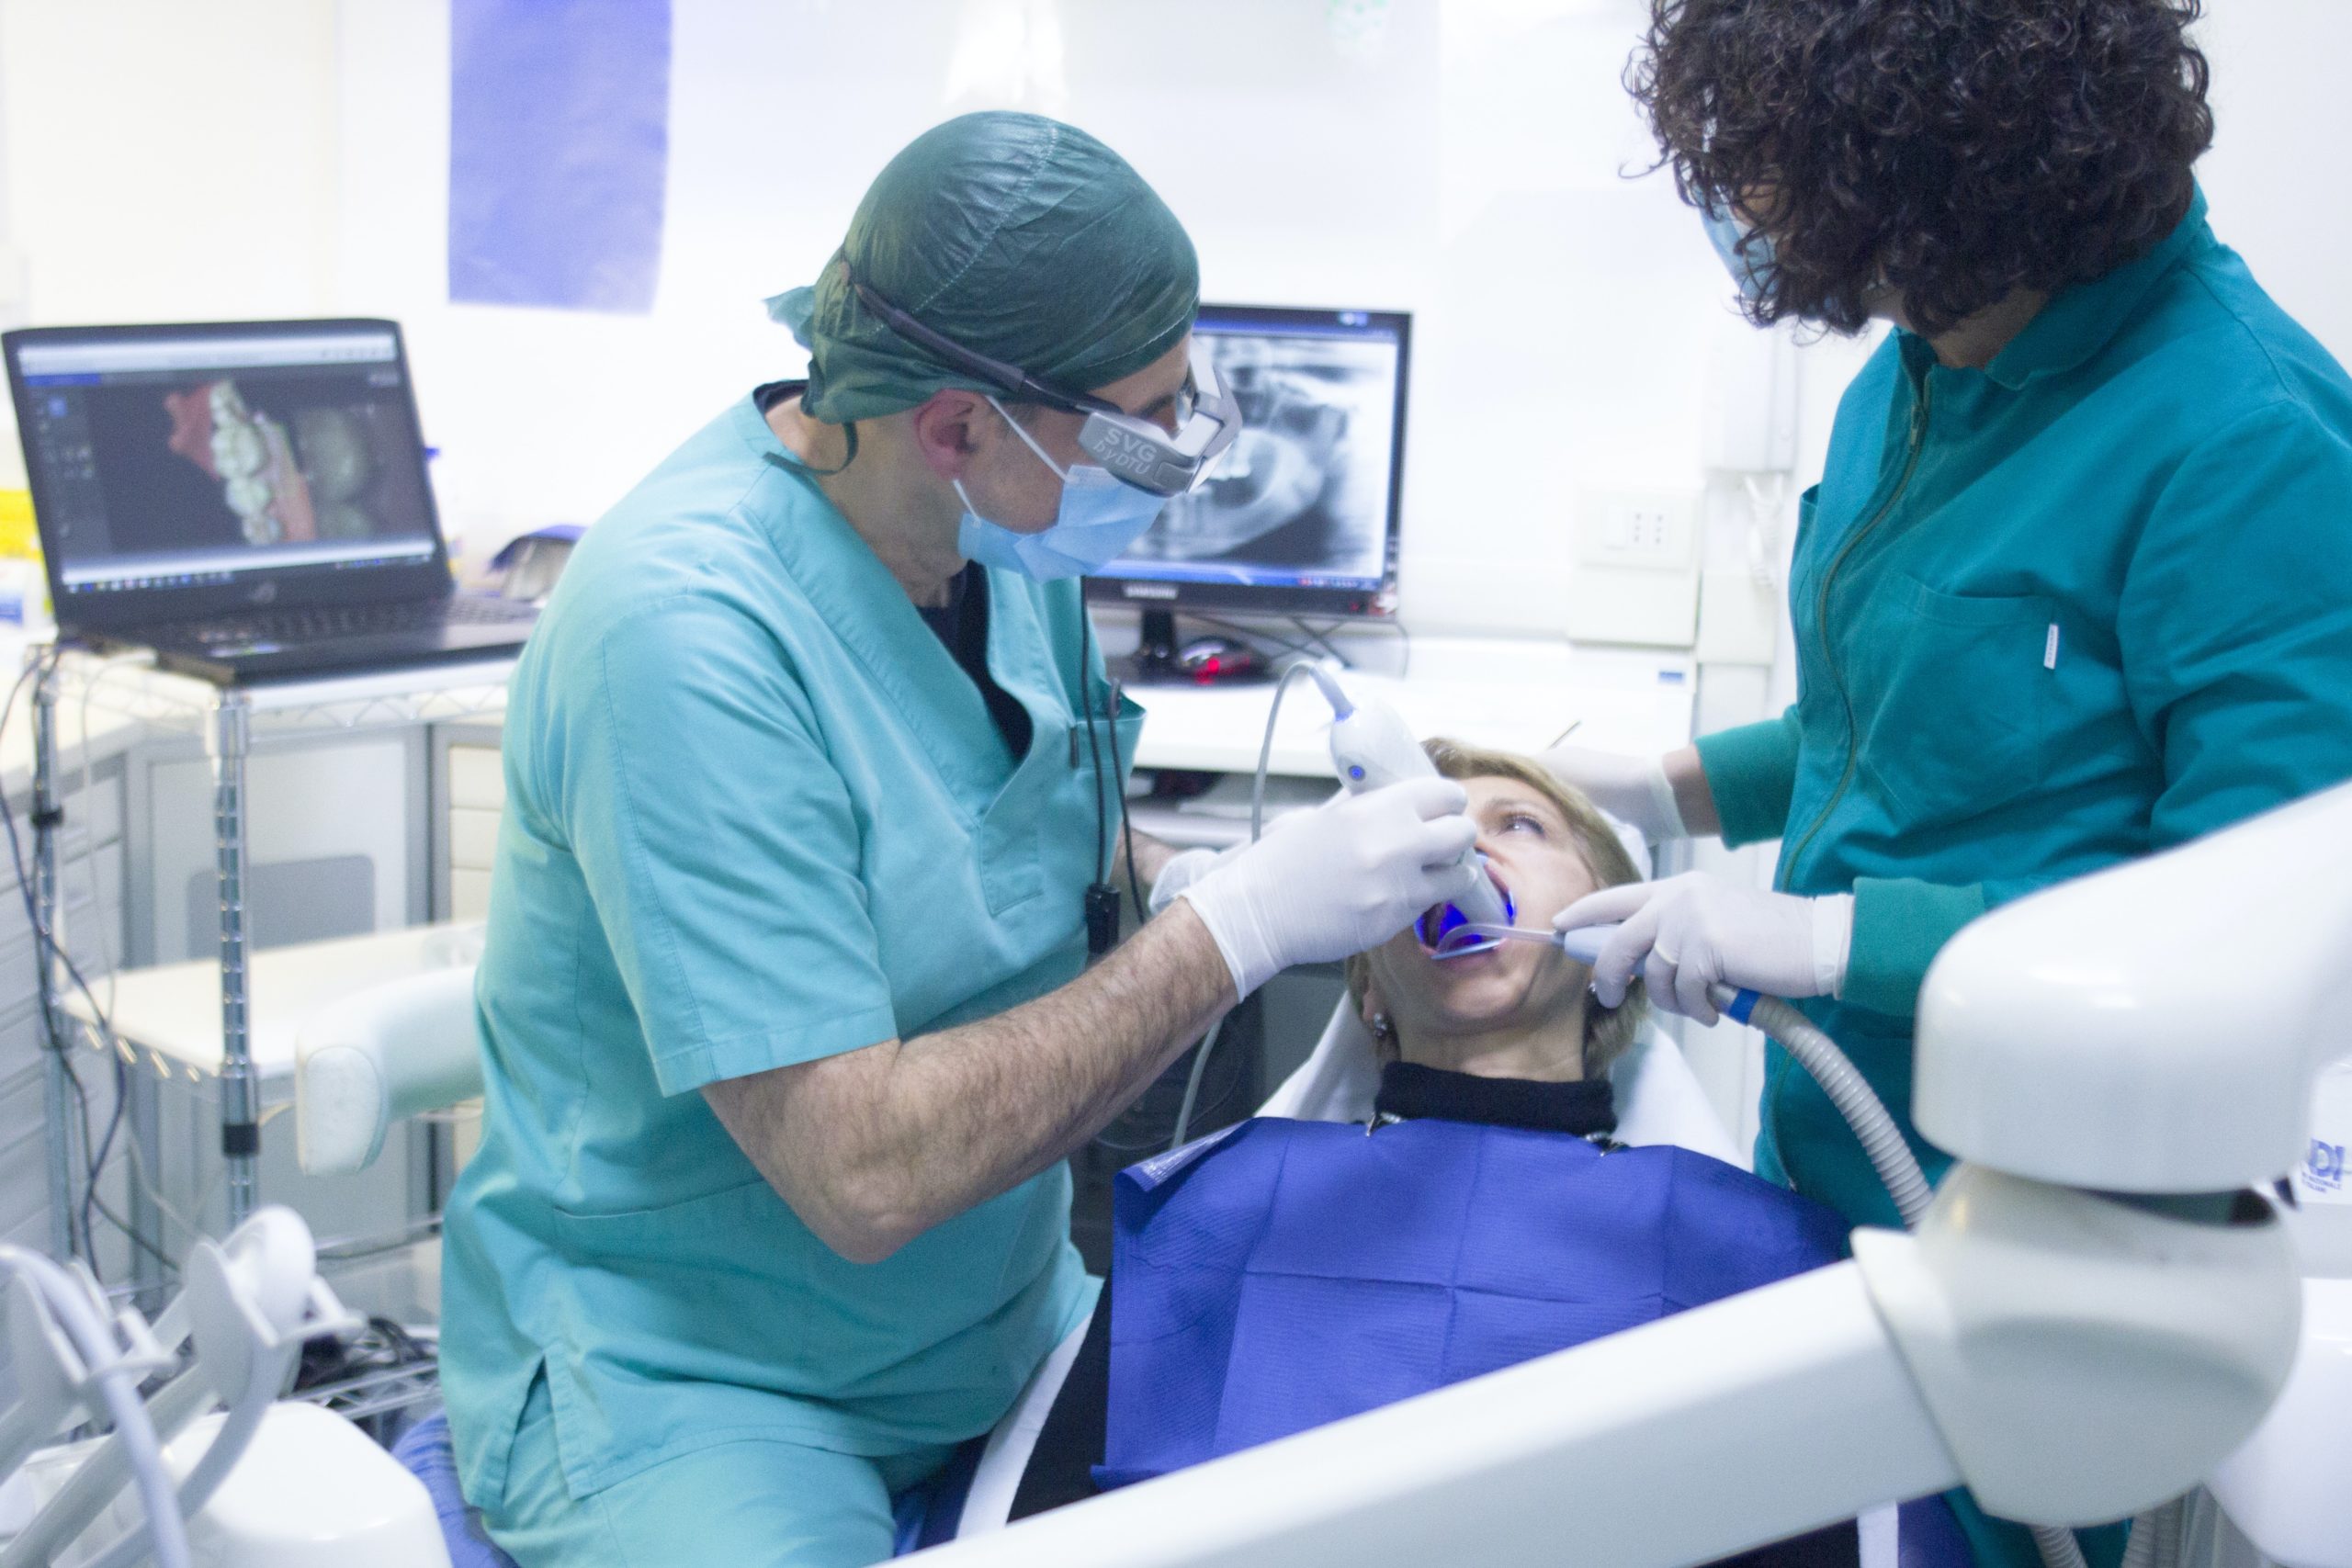 dentist treating a patient